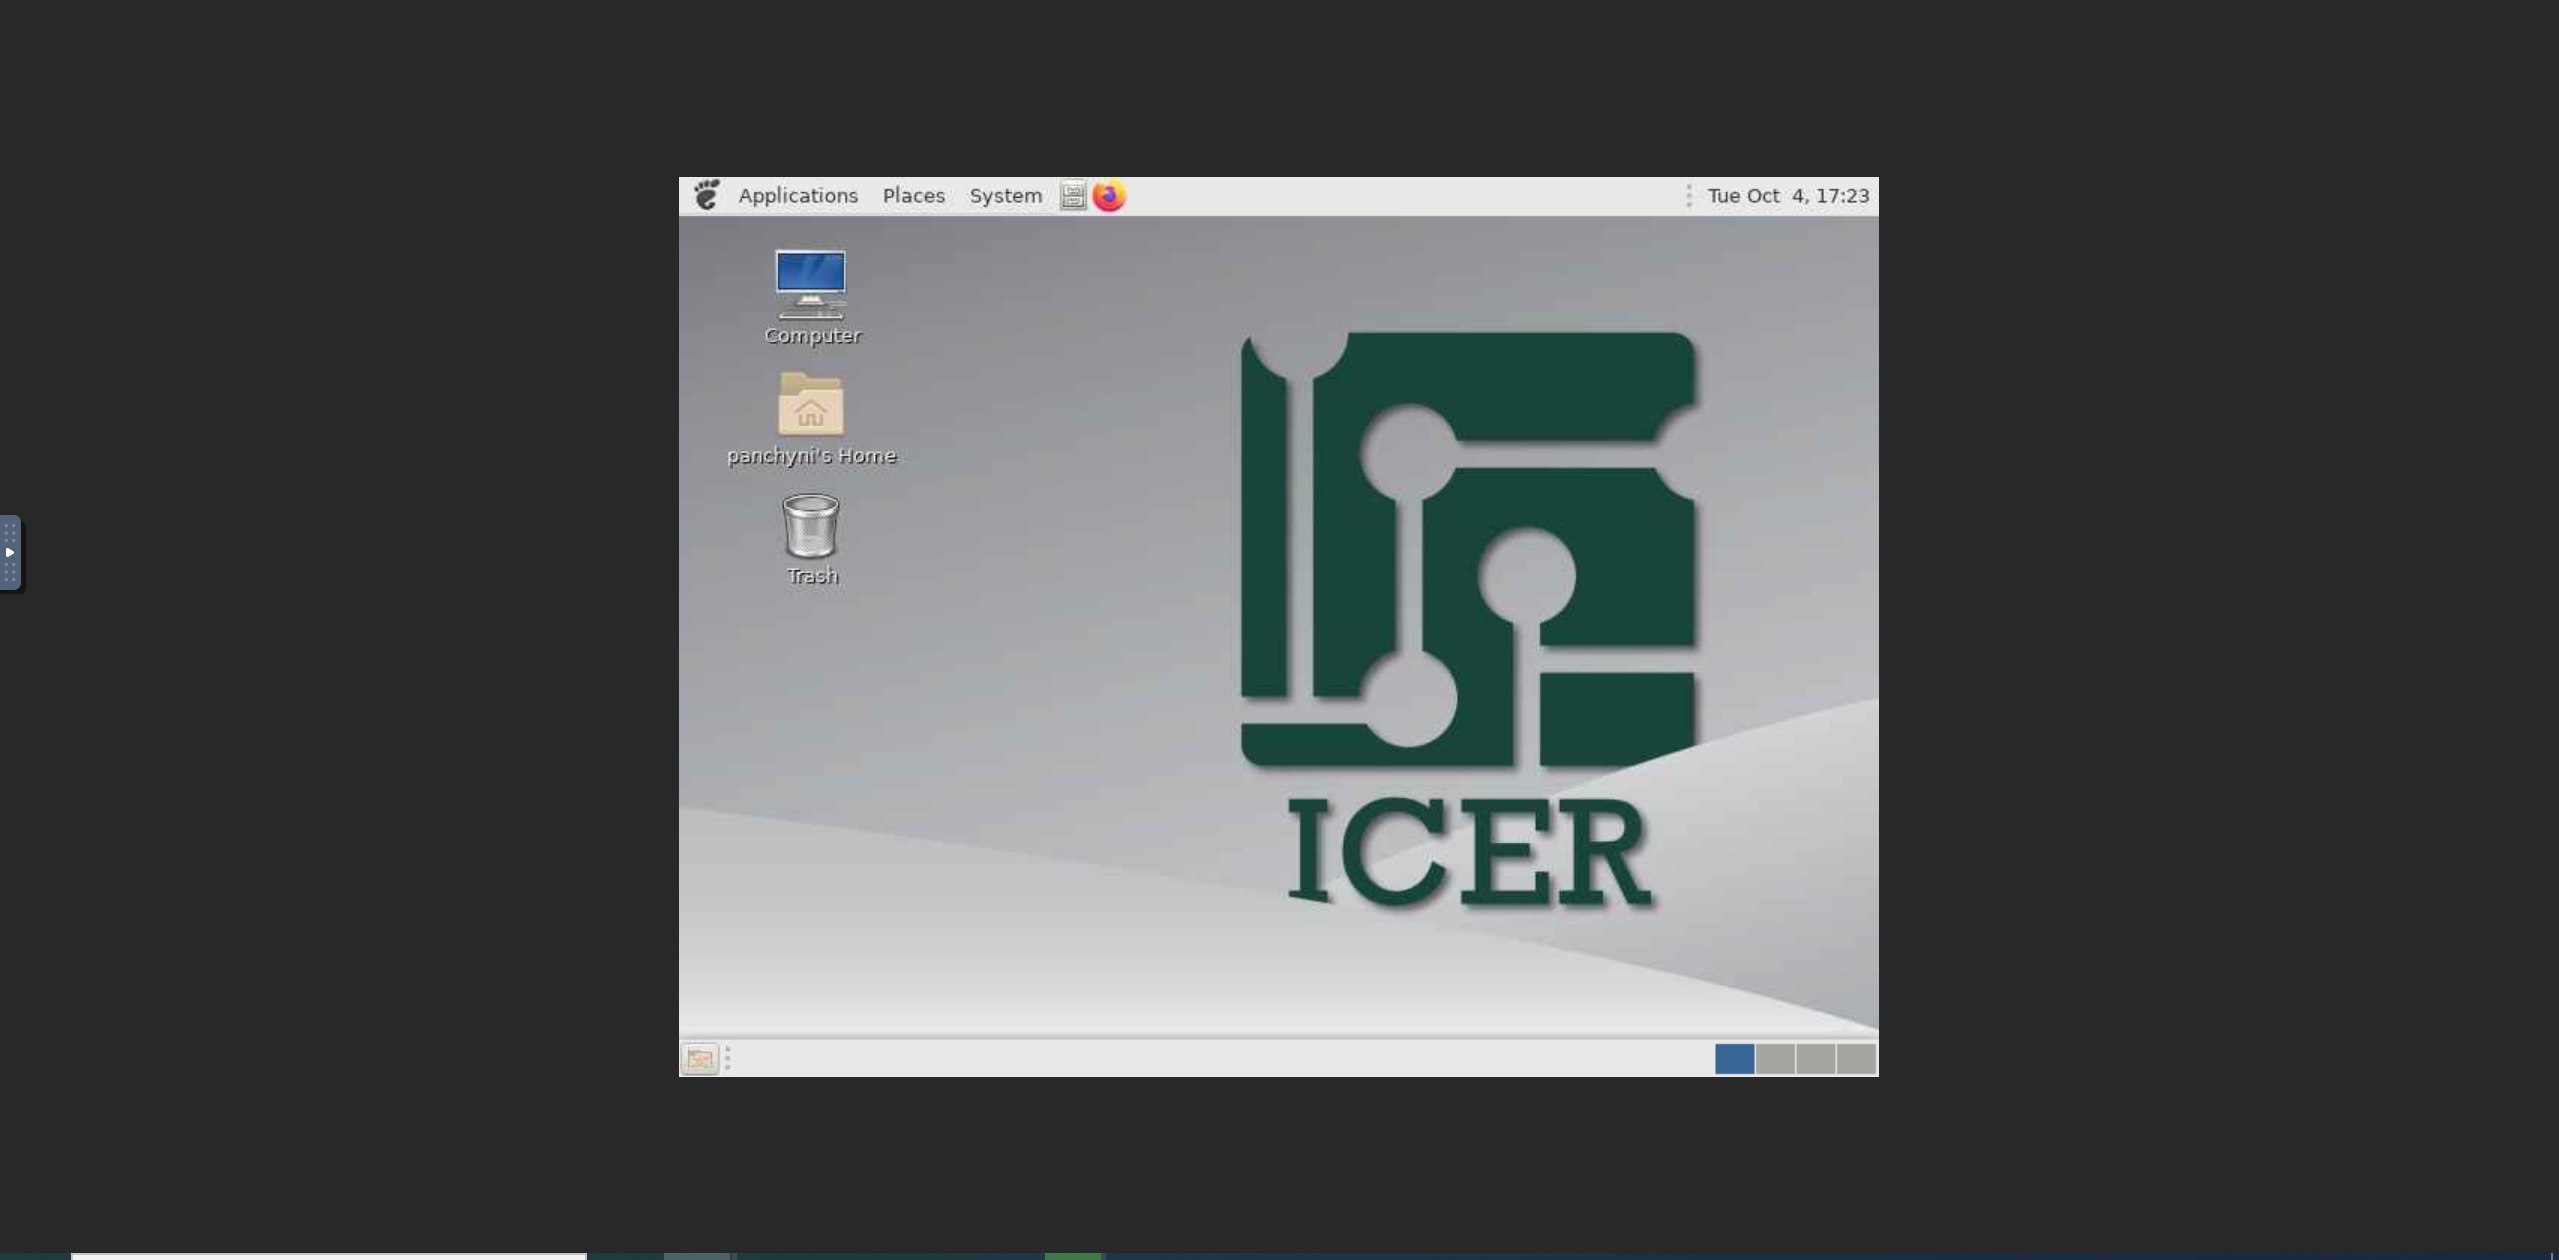 ICER interactive desktop screenshot showing the desktop limited to a central area of the screen.